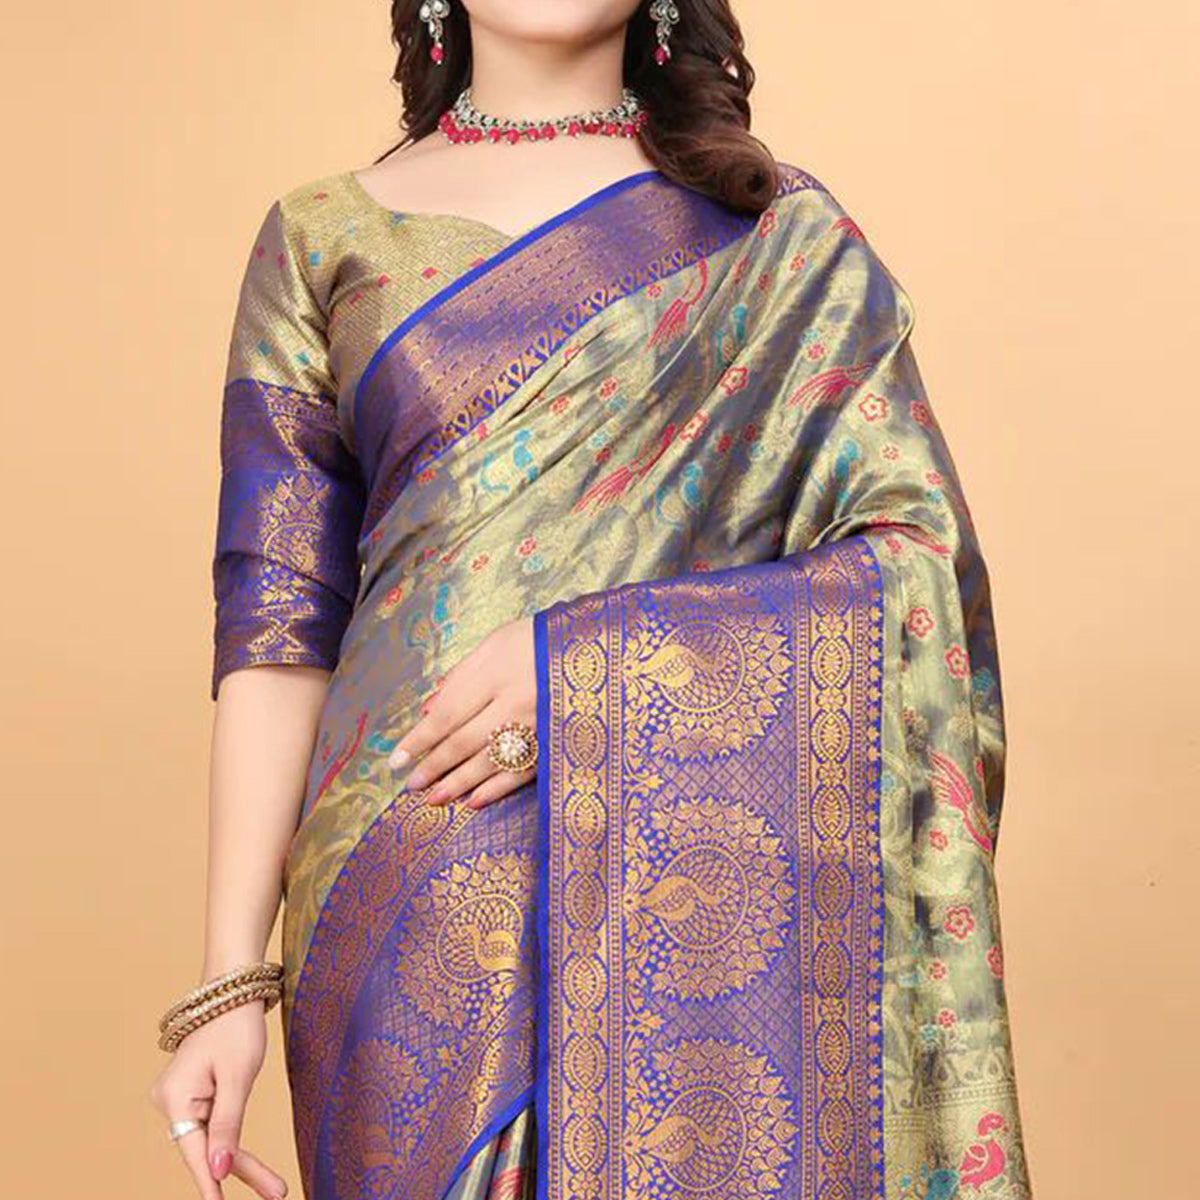 Royal Blue Floral Woven Tissue Silk Saree With Tassels